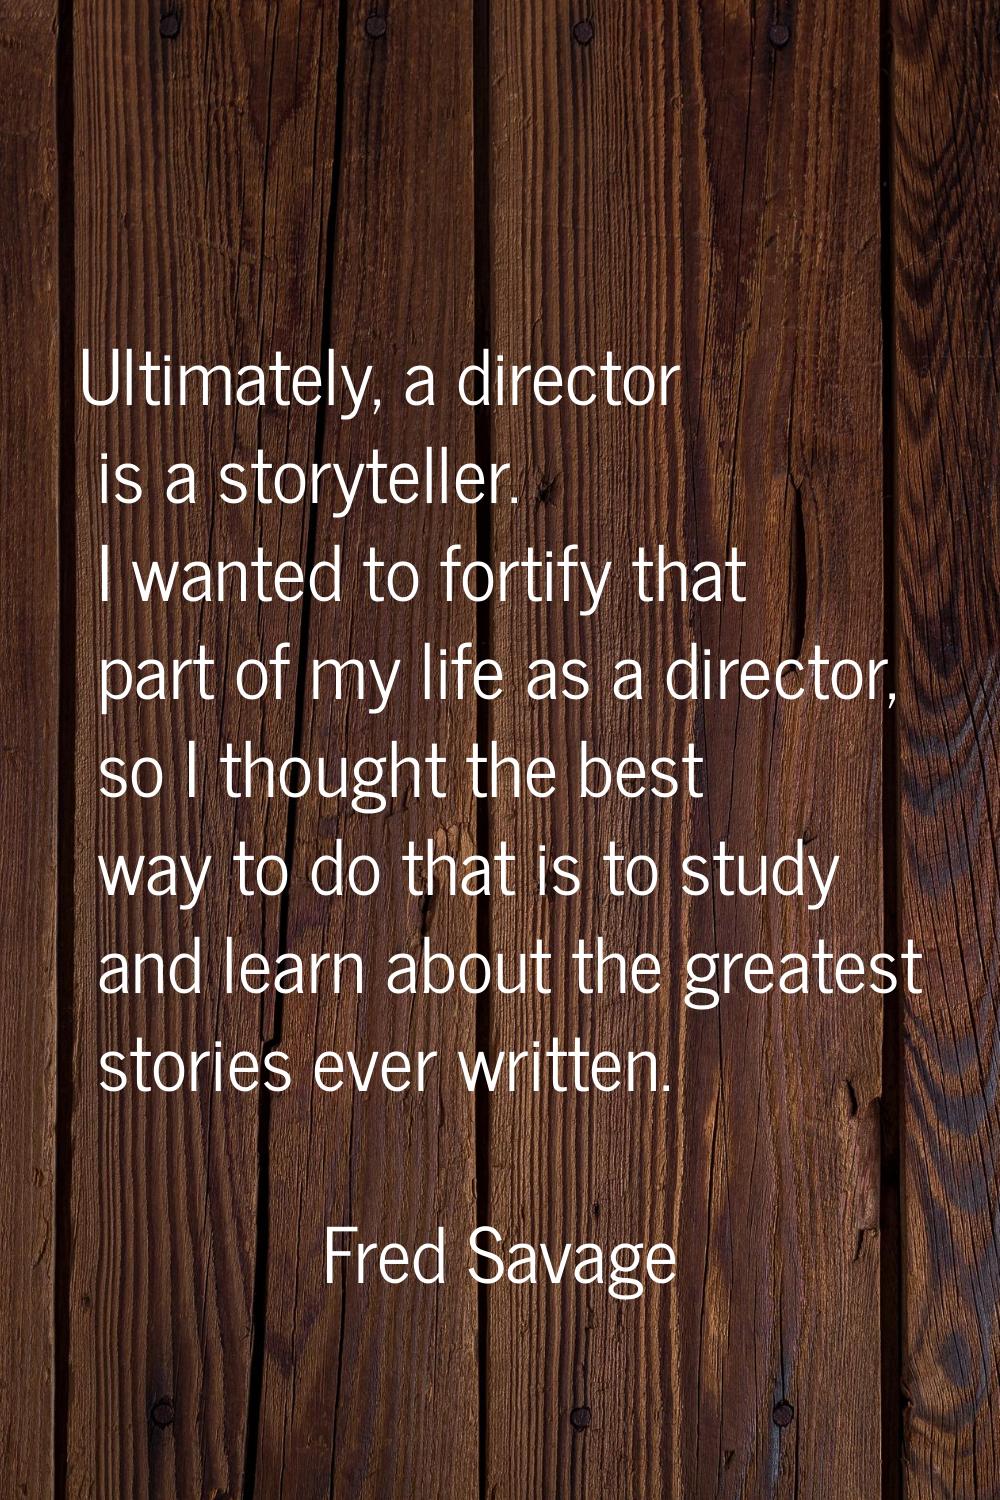 Ultimately, a director is a storyteller. I wanted to fortify that part of my life as a director, so